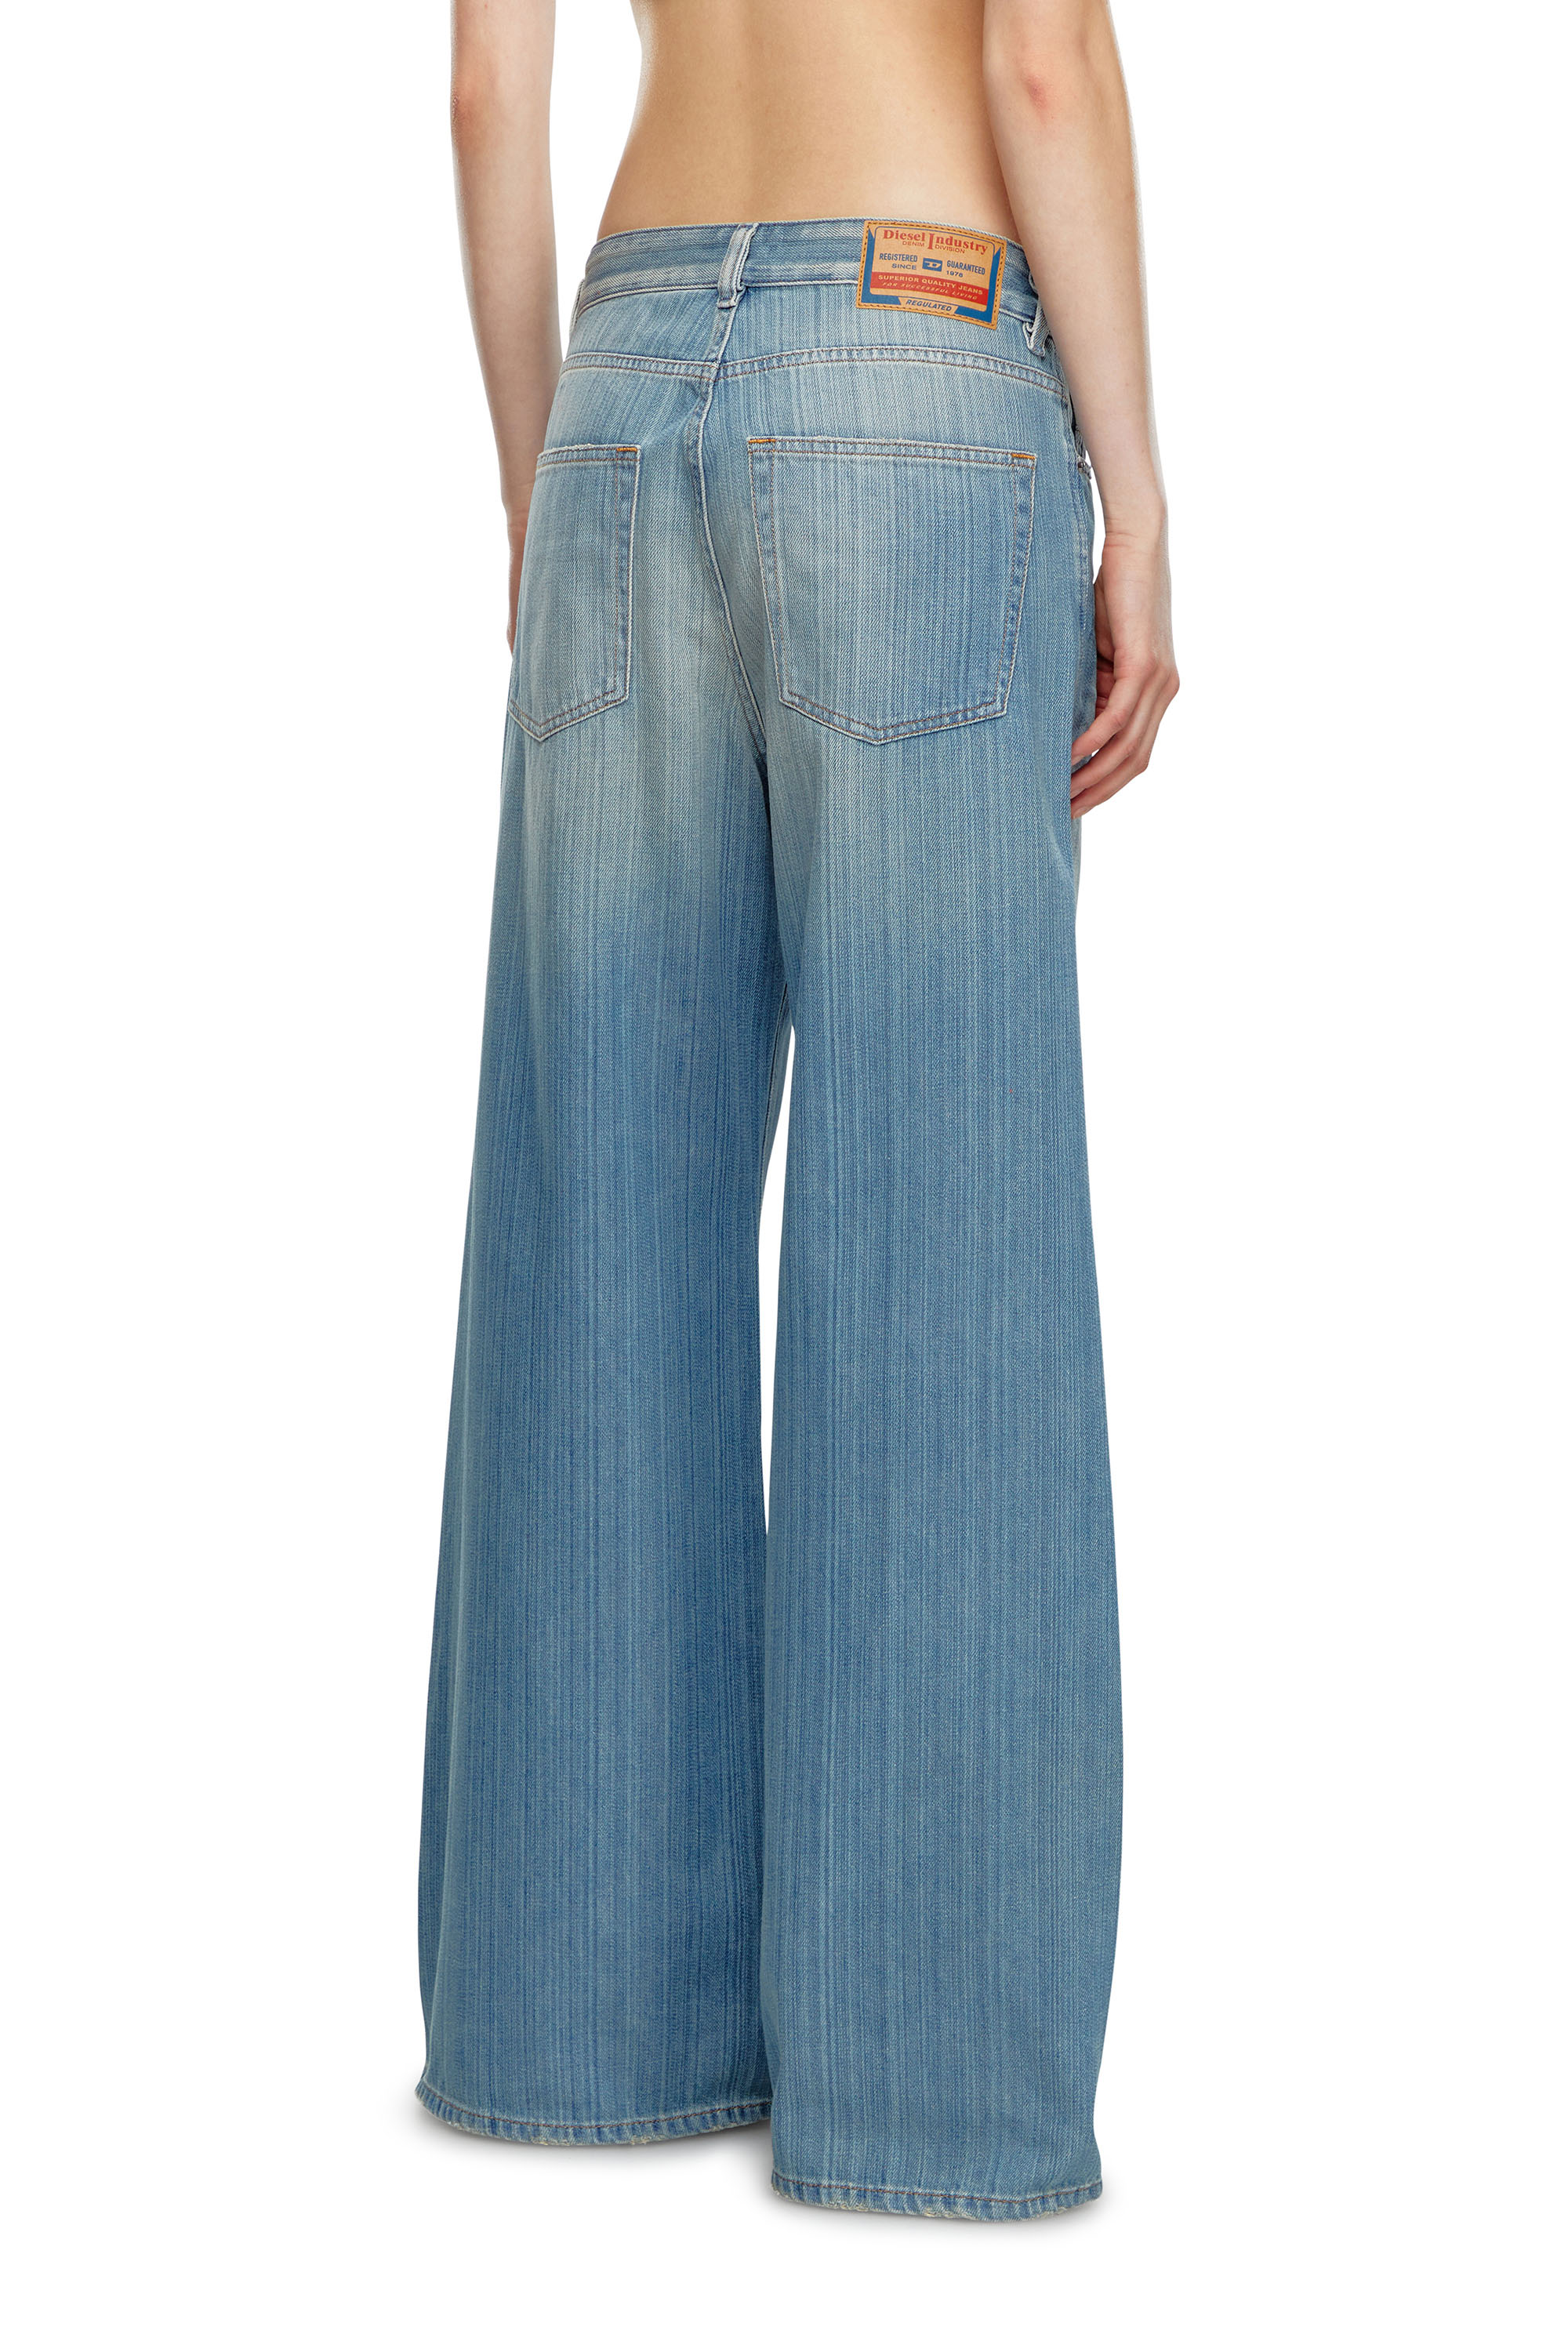 Diesel - Straight Jeans 1996 D-Sire 09J87, Mujer Straight Jeans - 1996 D-Sire in Azul marino - Image 3